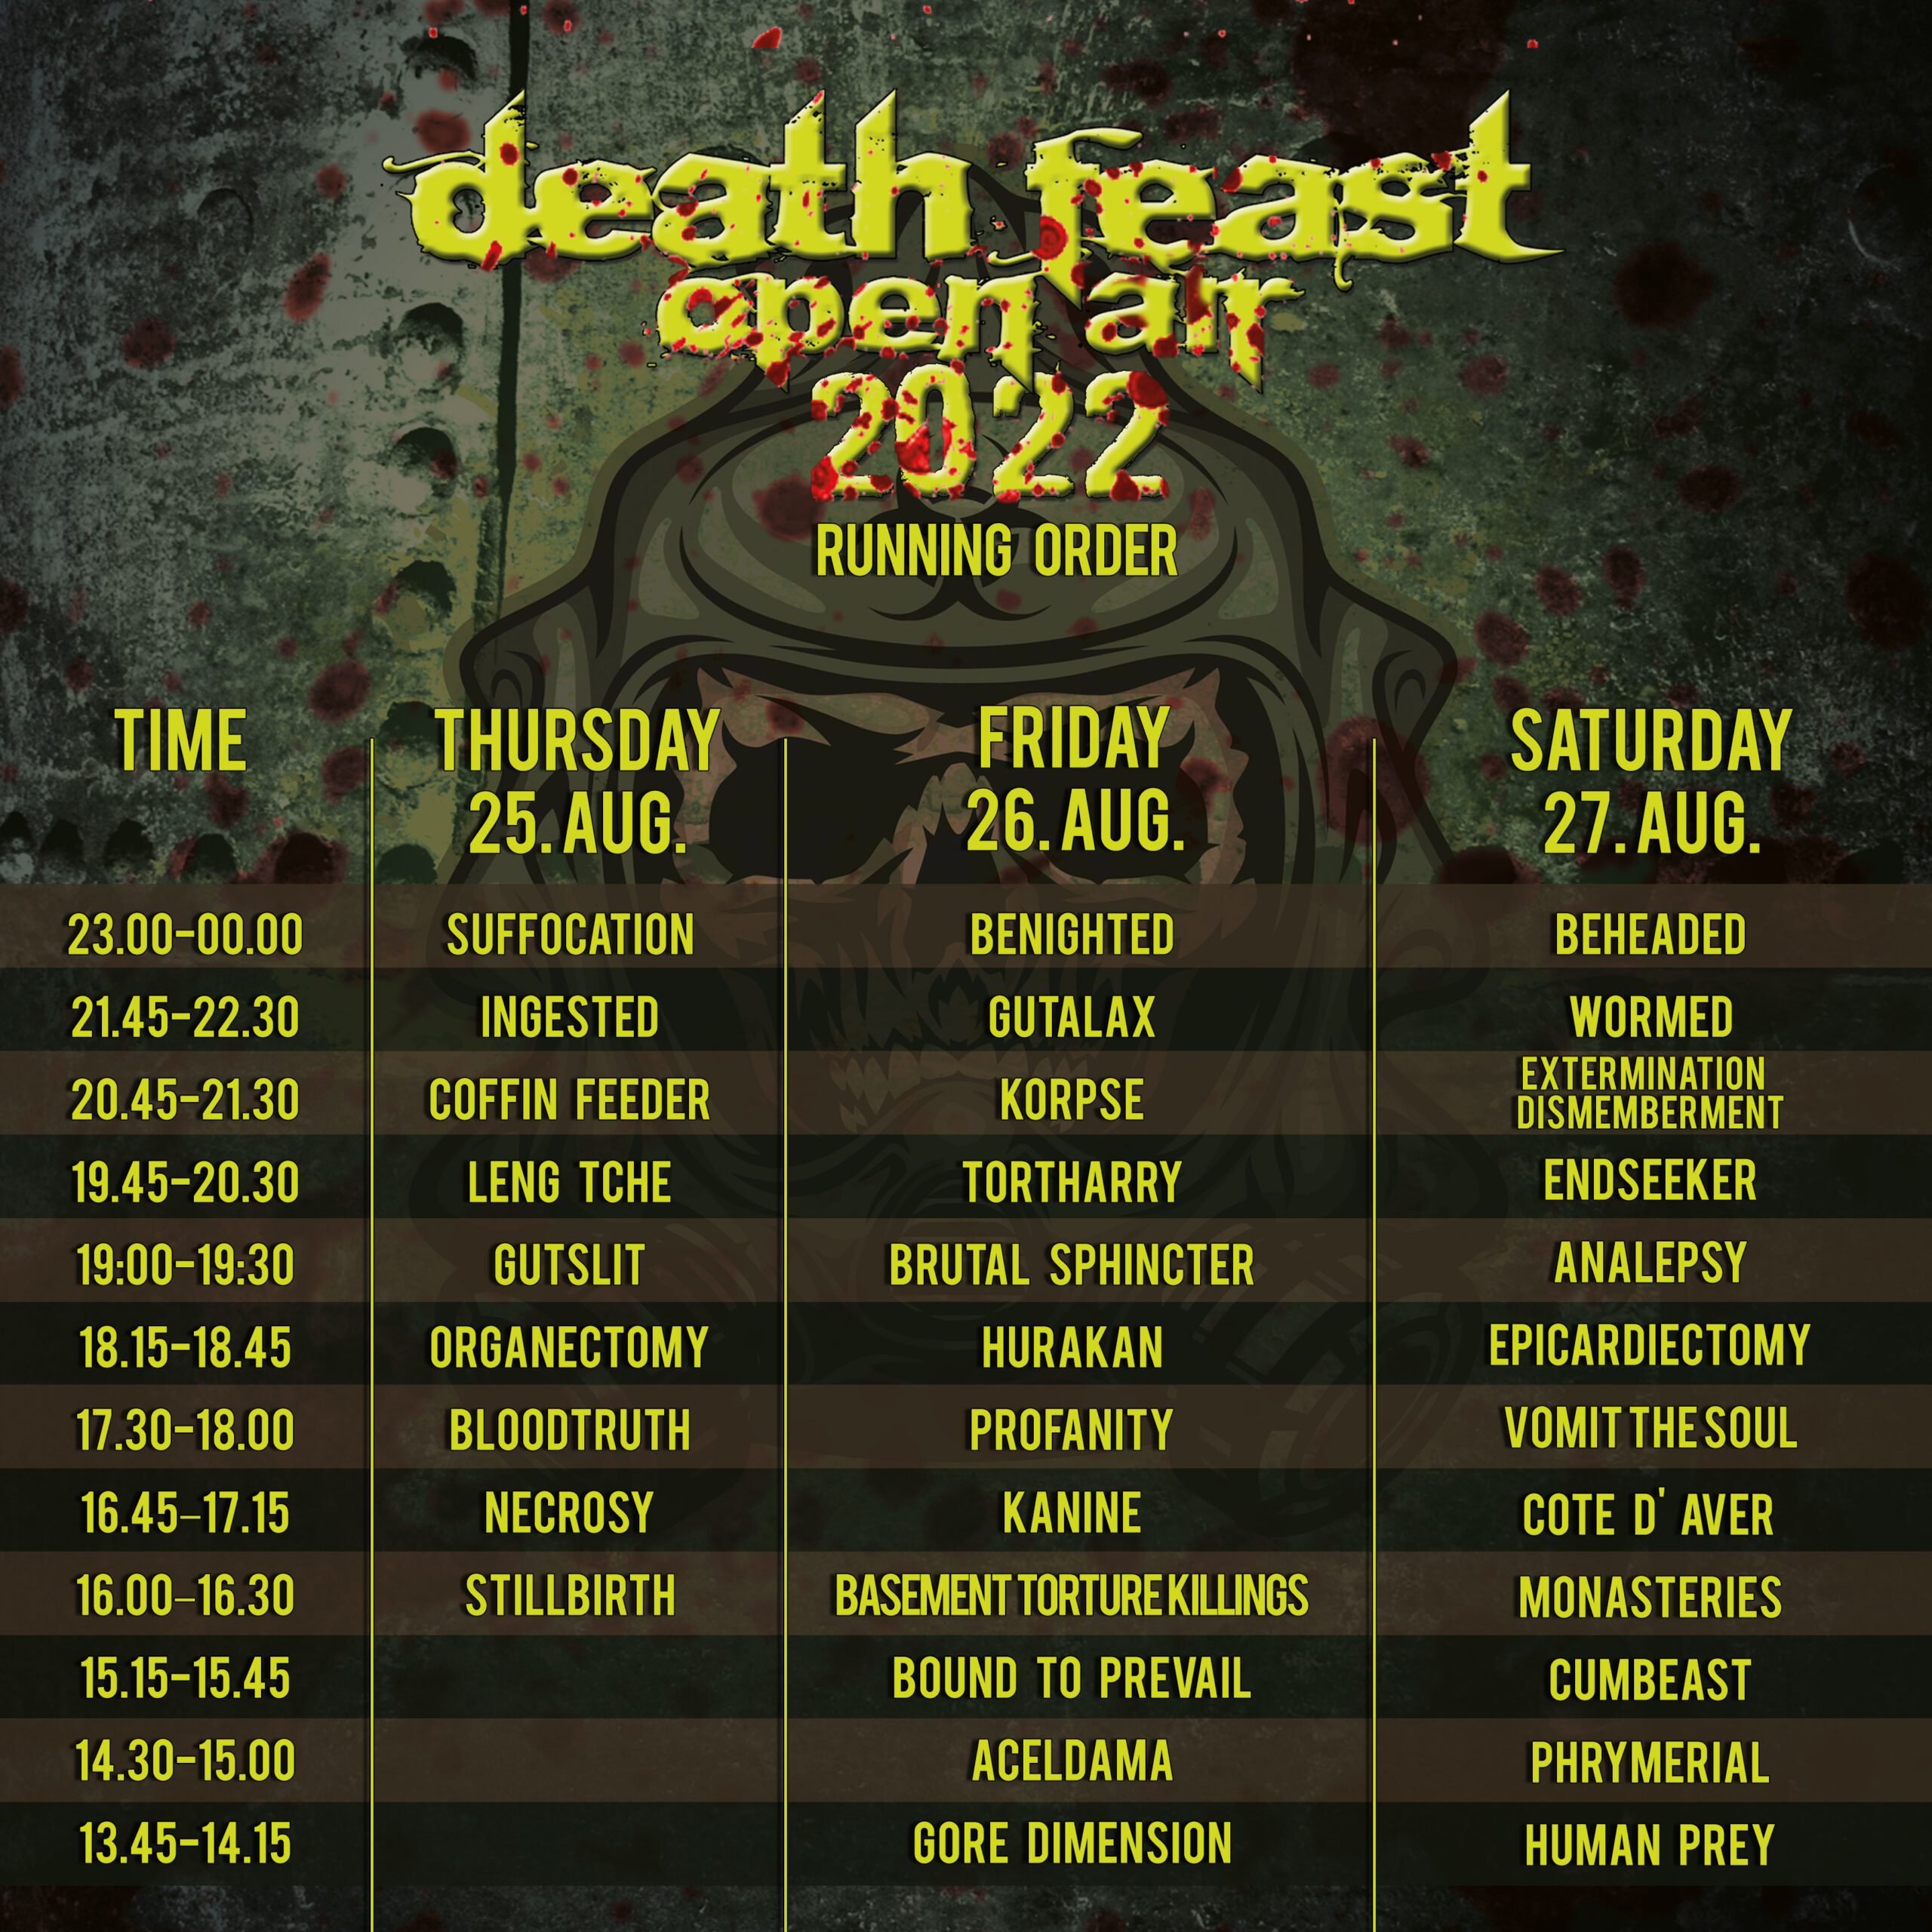 Running Order for the Deathfeast Open Air 2022